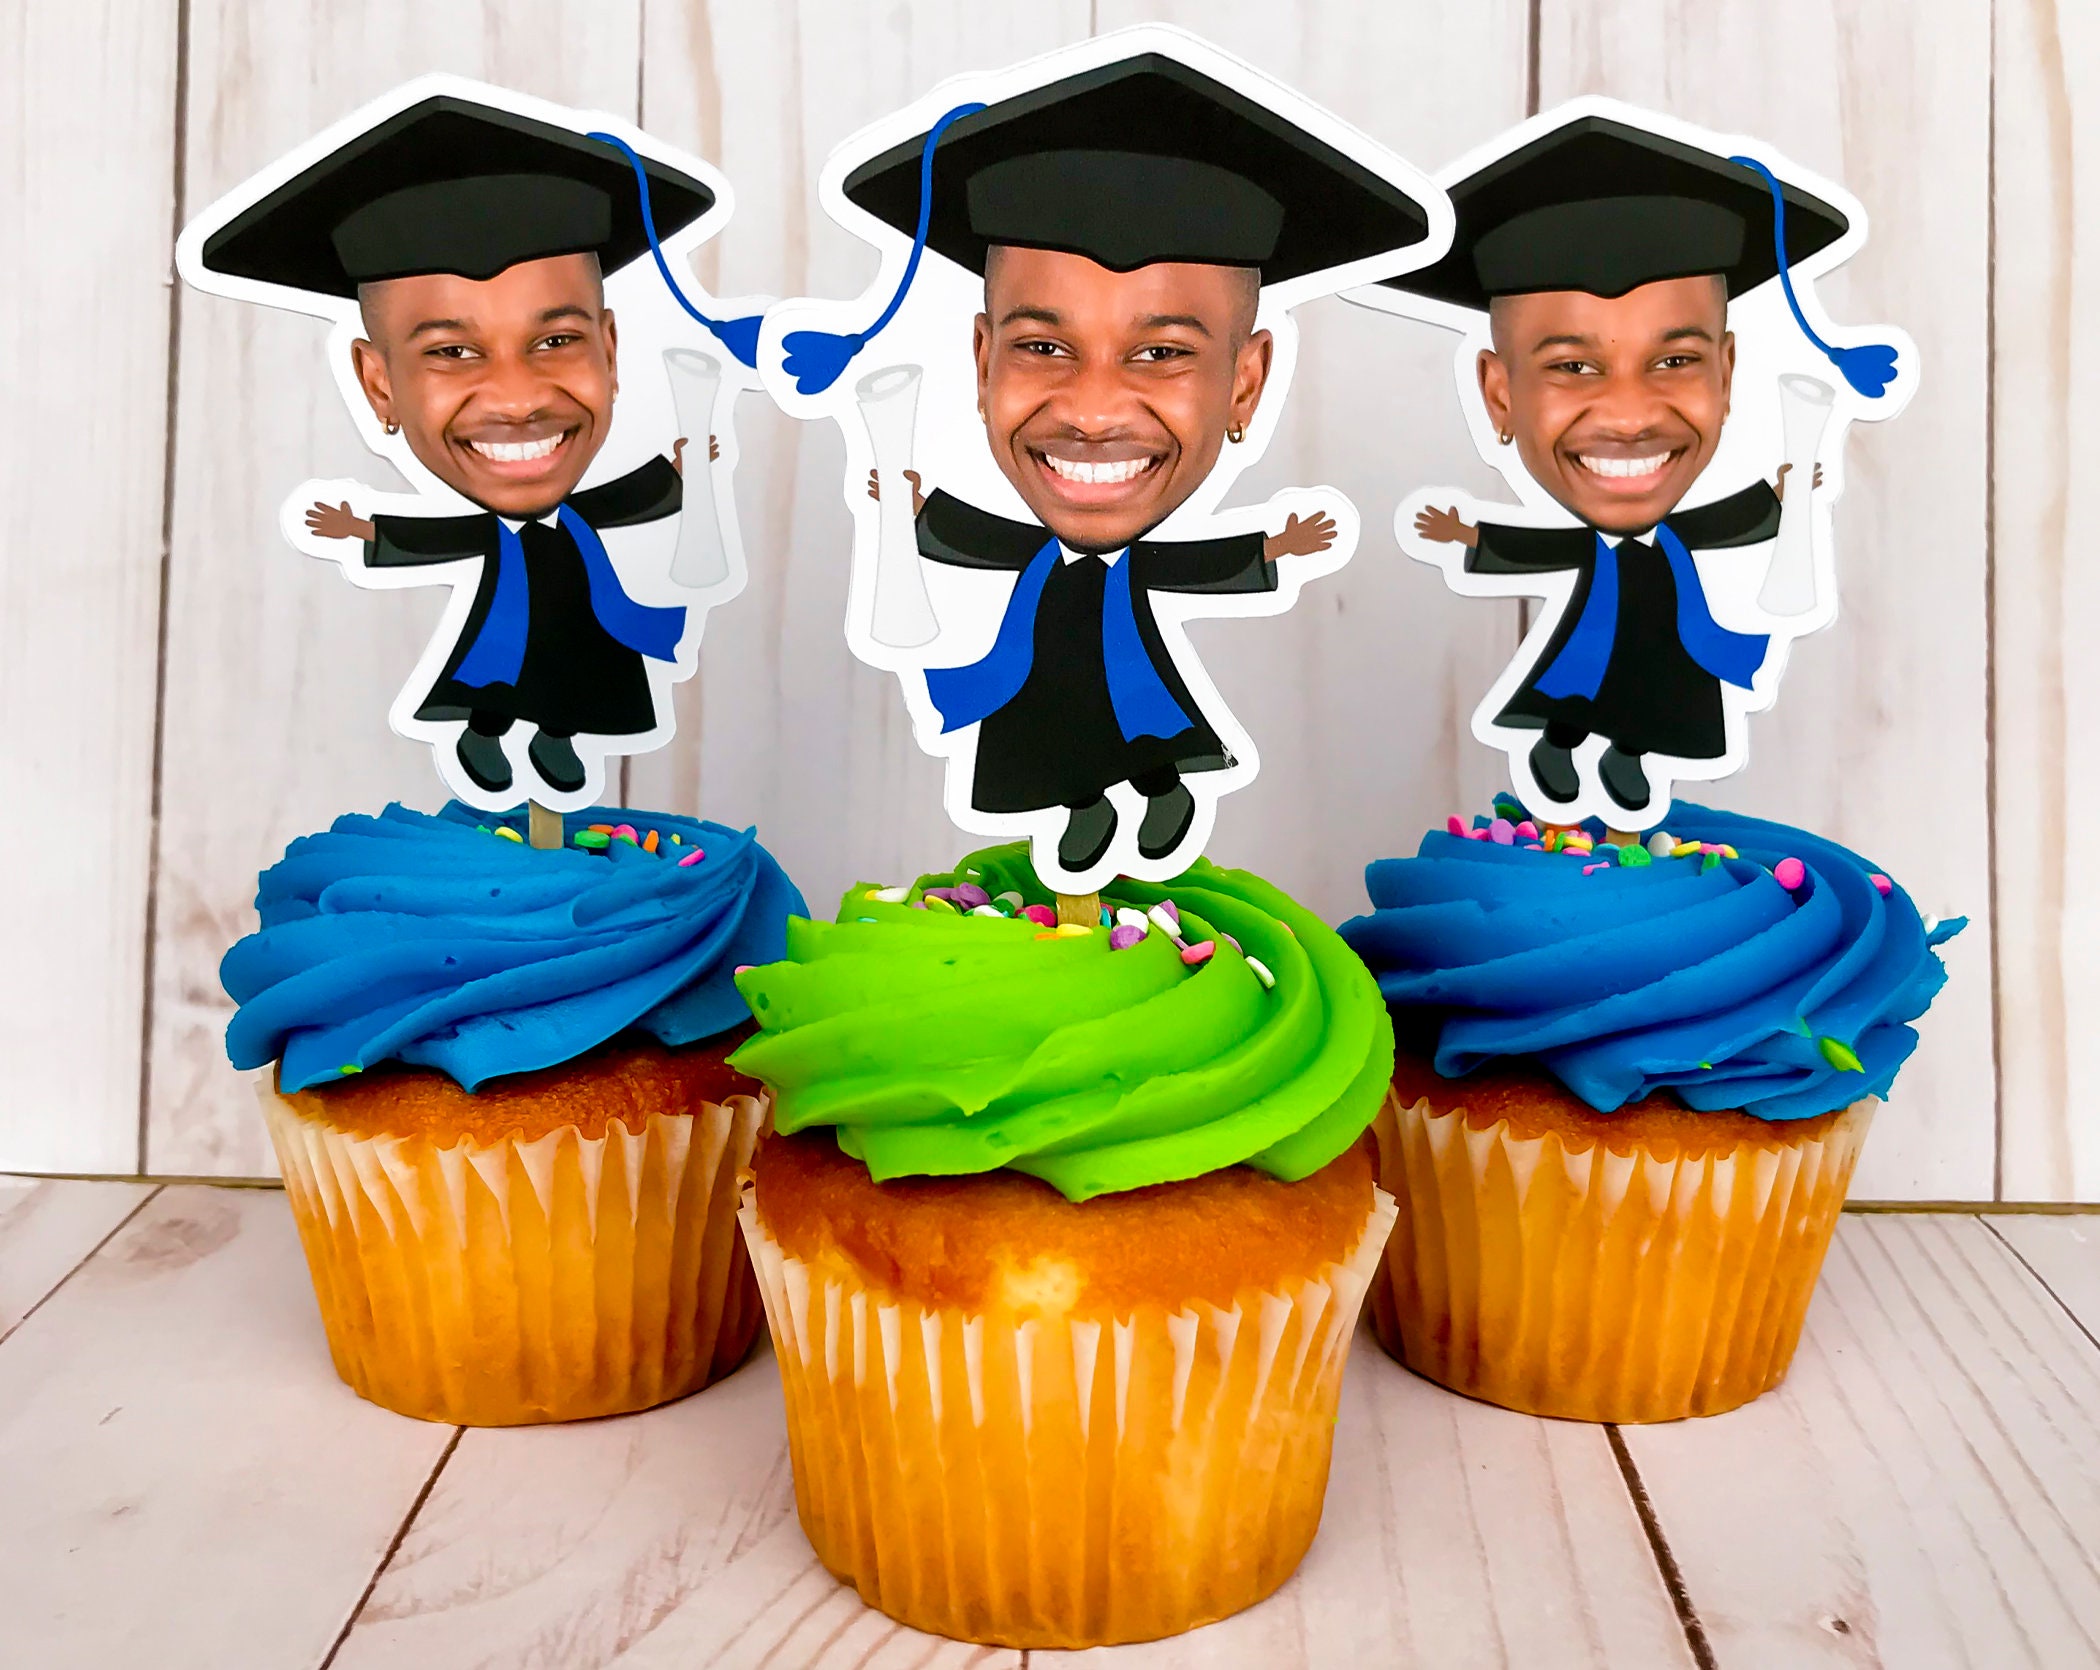 84 Pieces Graduation Cake Toppers Cupcake Topper Picks Class of 2020 Cupcake Toppers with Graduation Cap Design for Graduation Party Decoration 